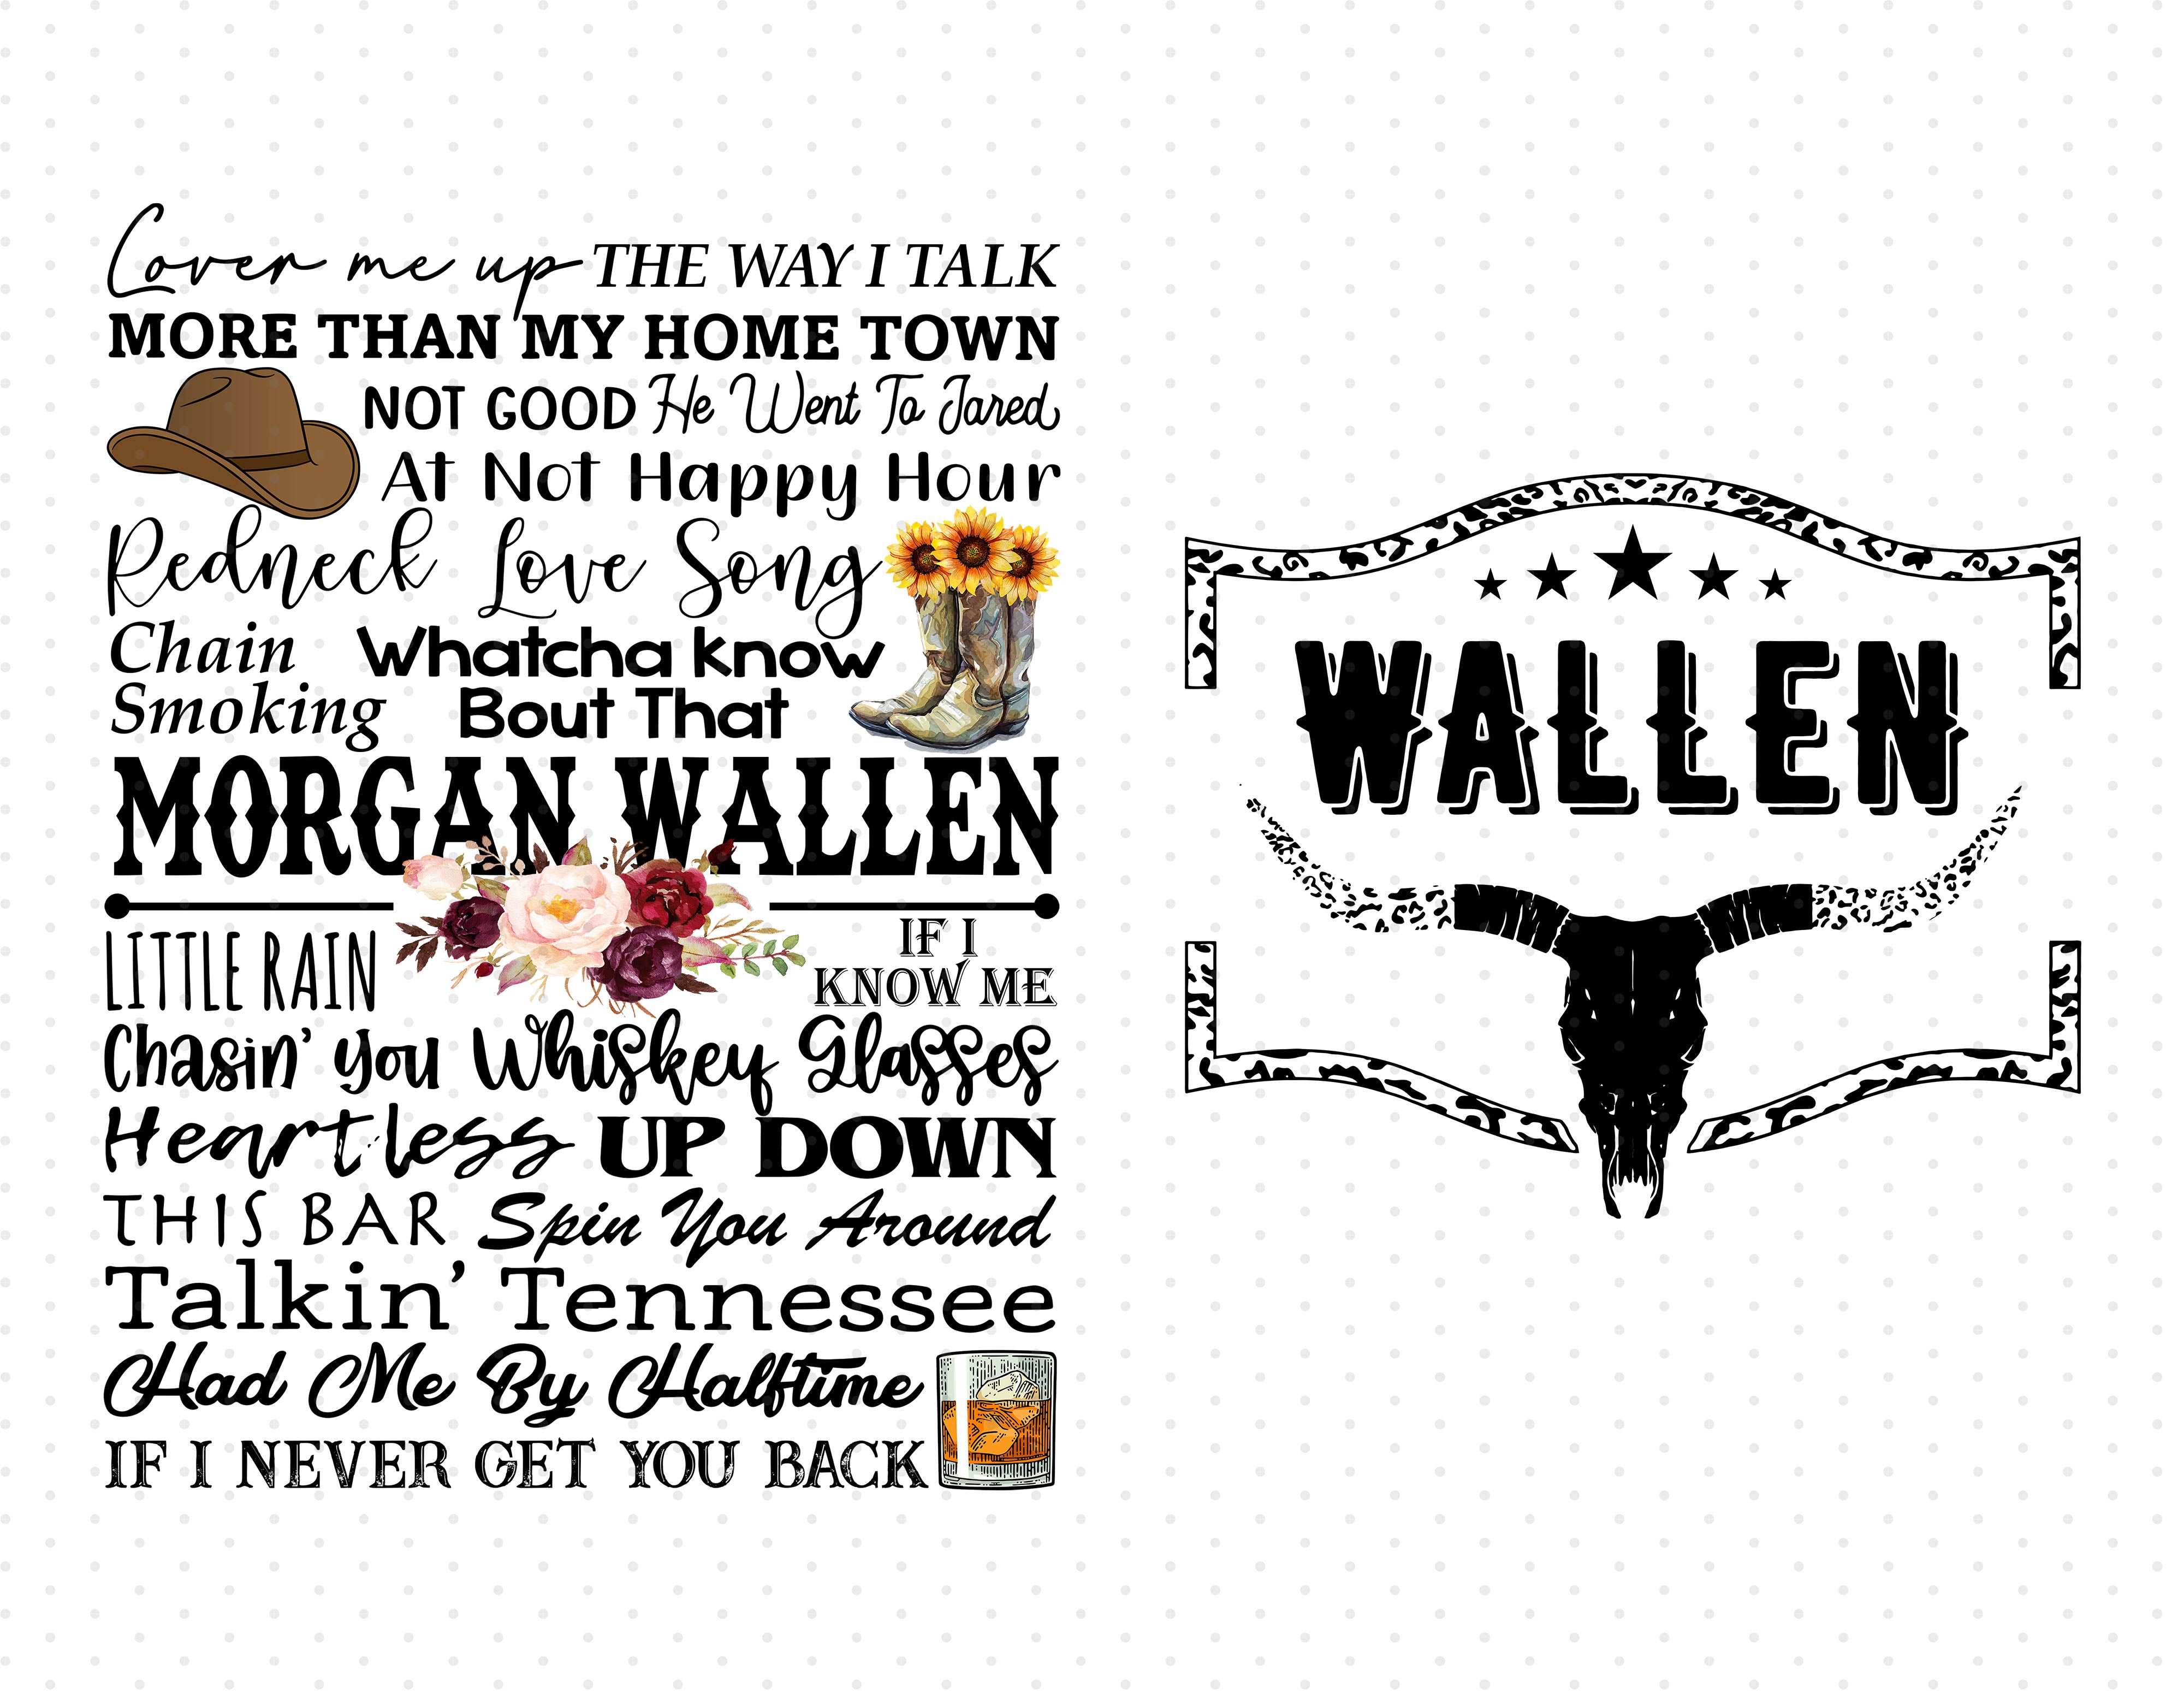 Wasted On You PNG Sublimation Morgan Wallen sublimation